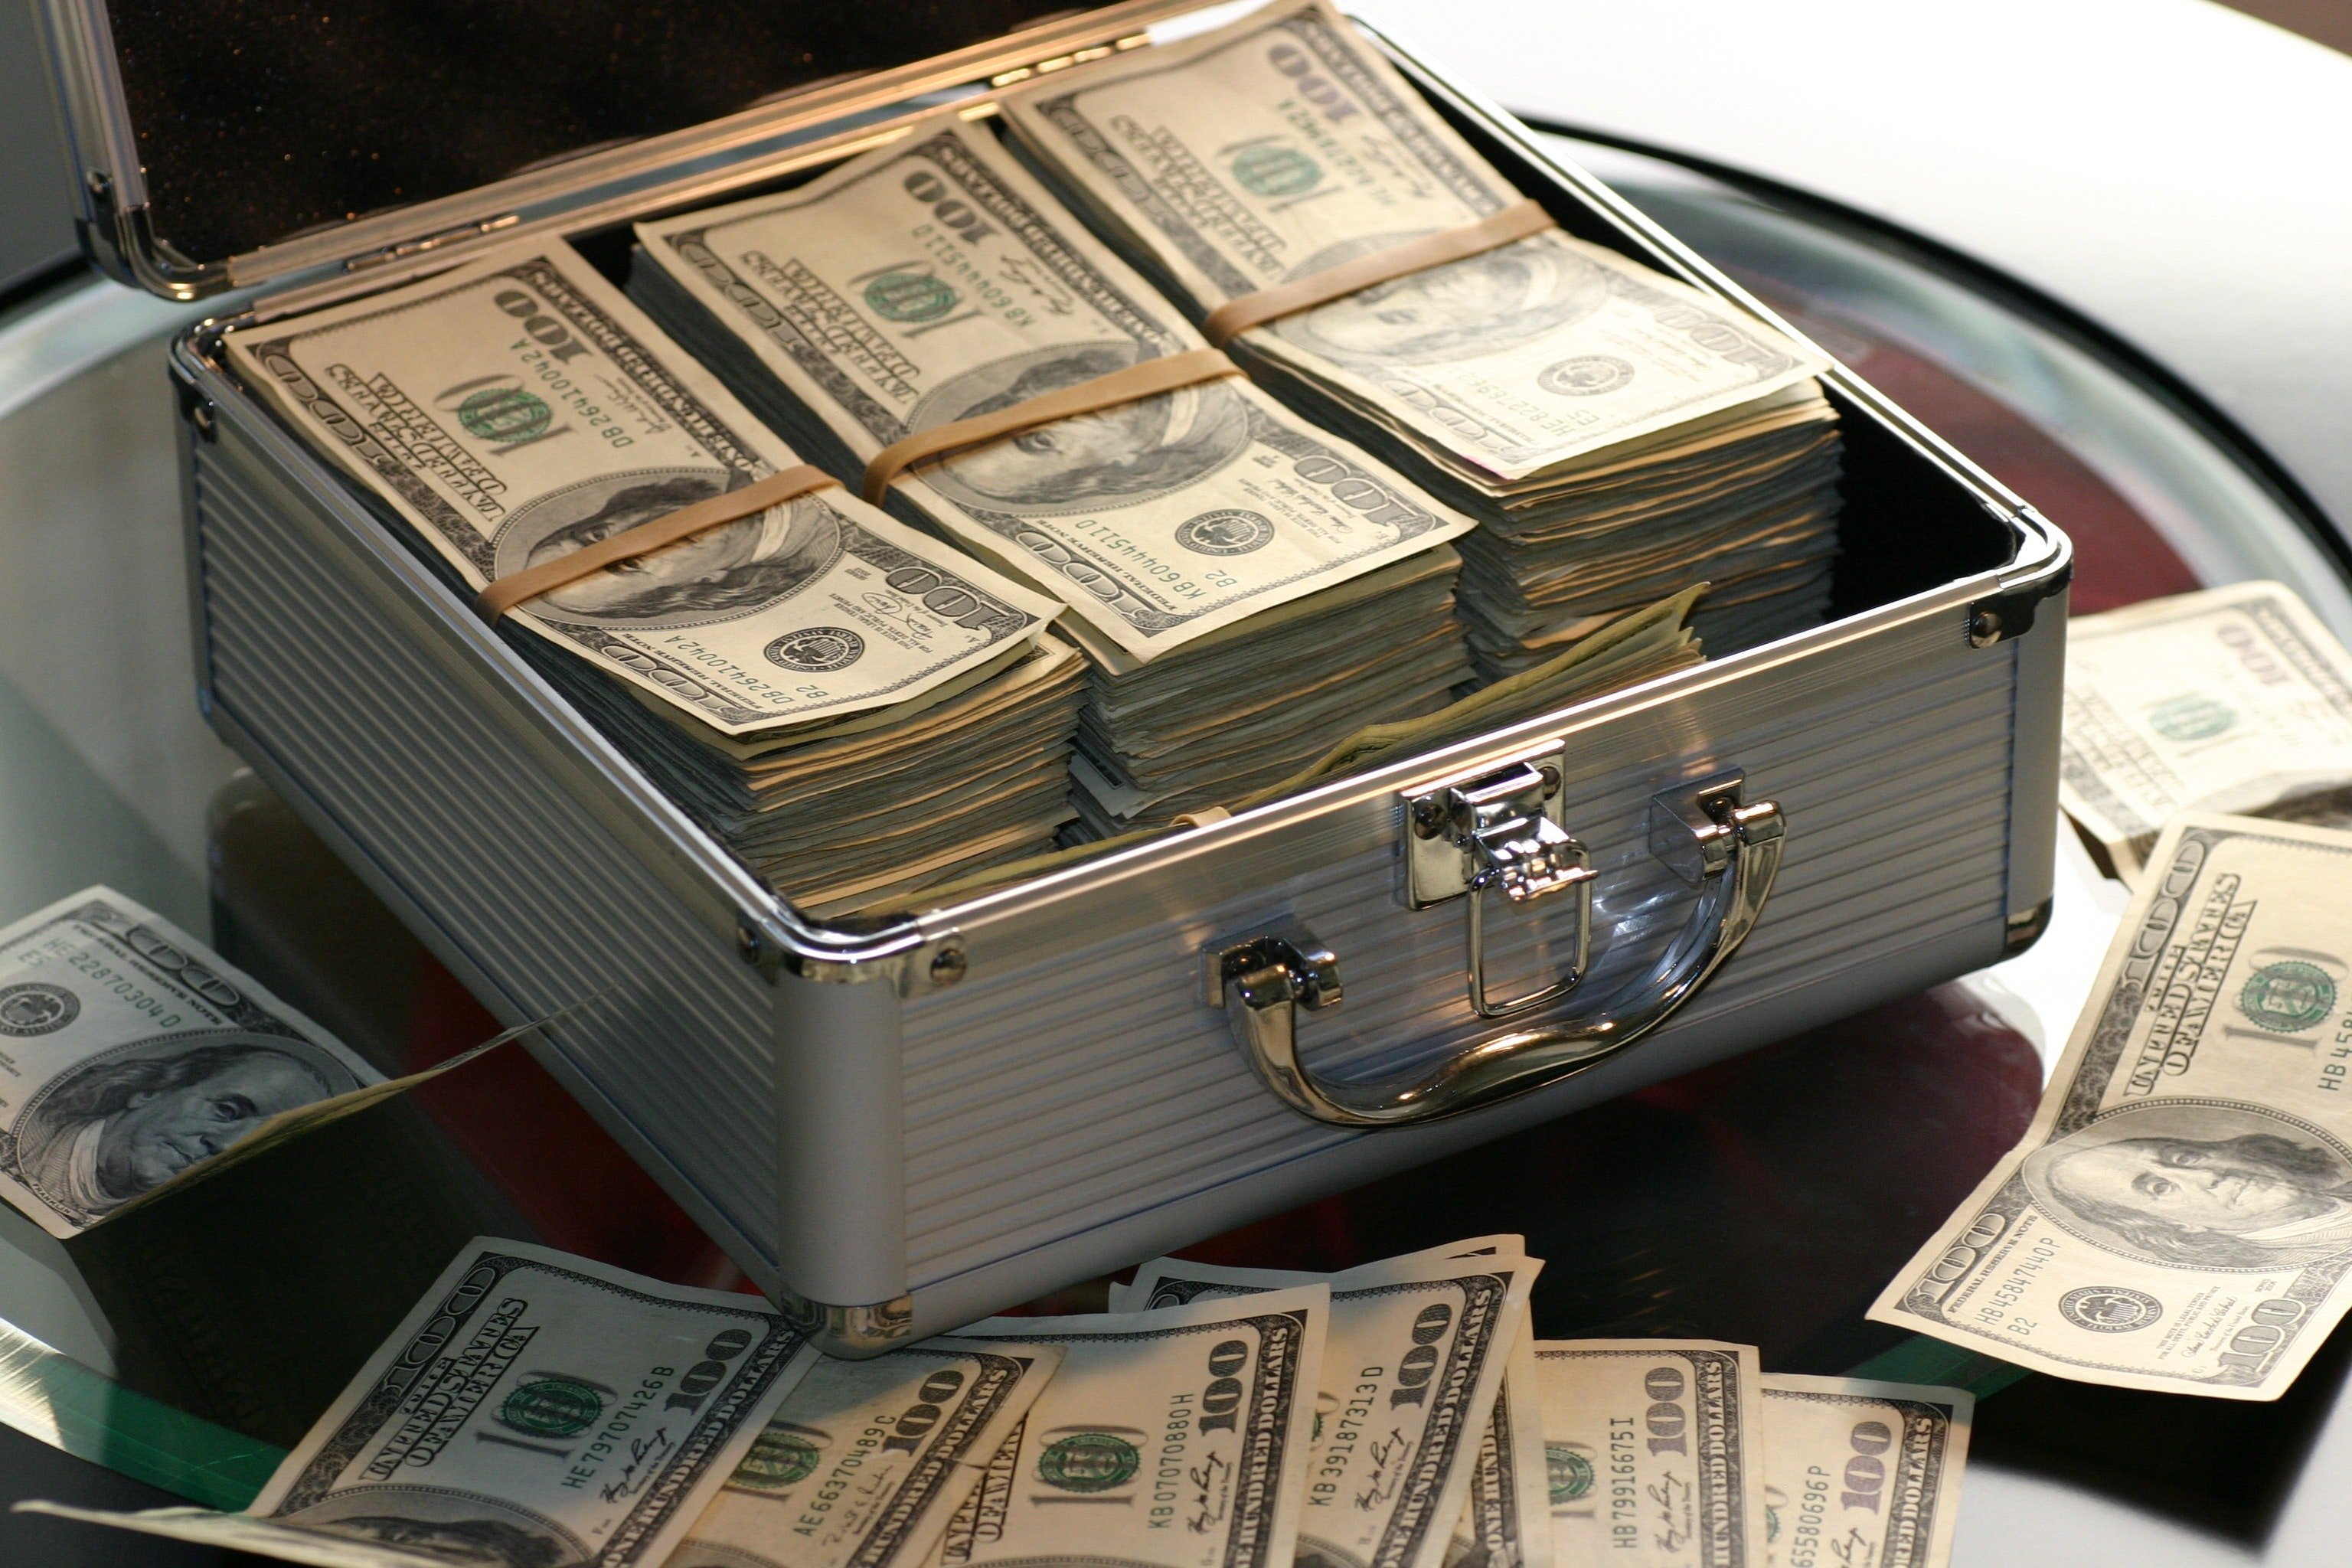 Cops discovered a briefcase filled with cash from the Catherine's house | Photo: Pexels